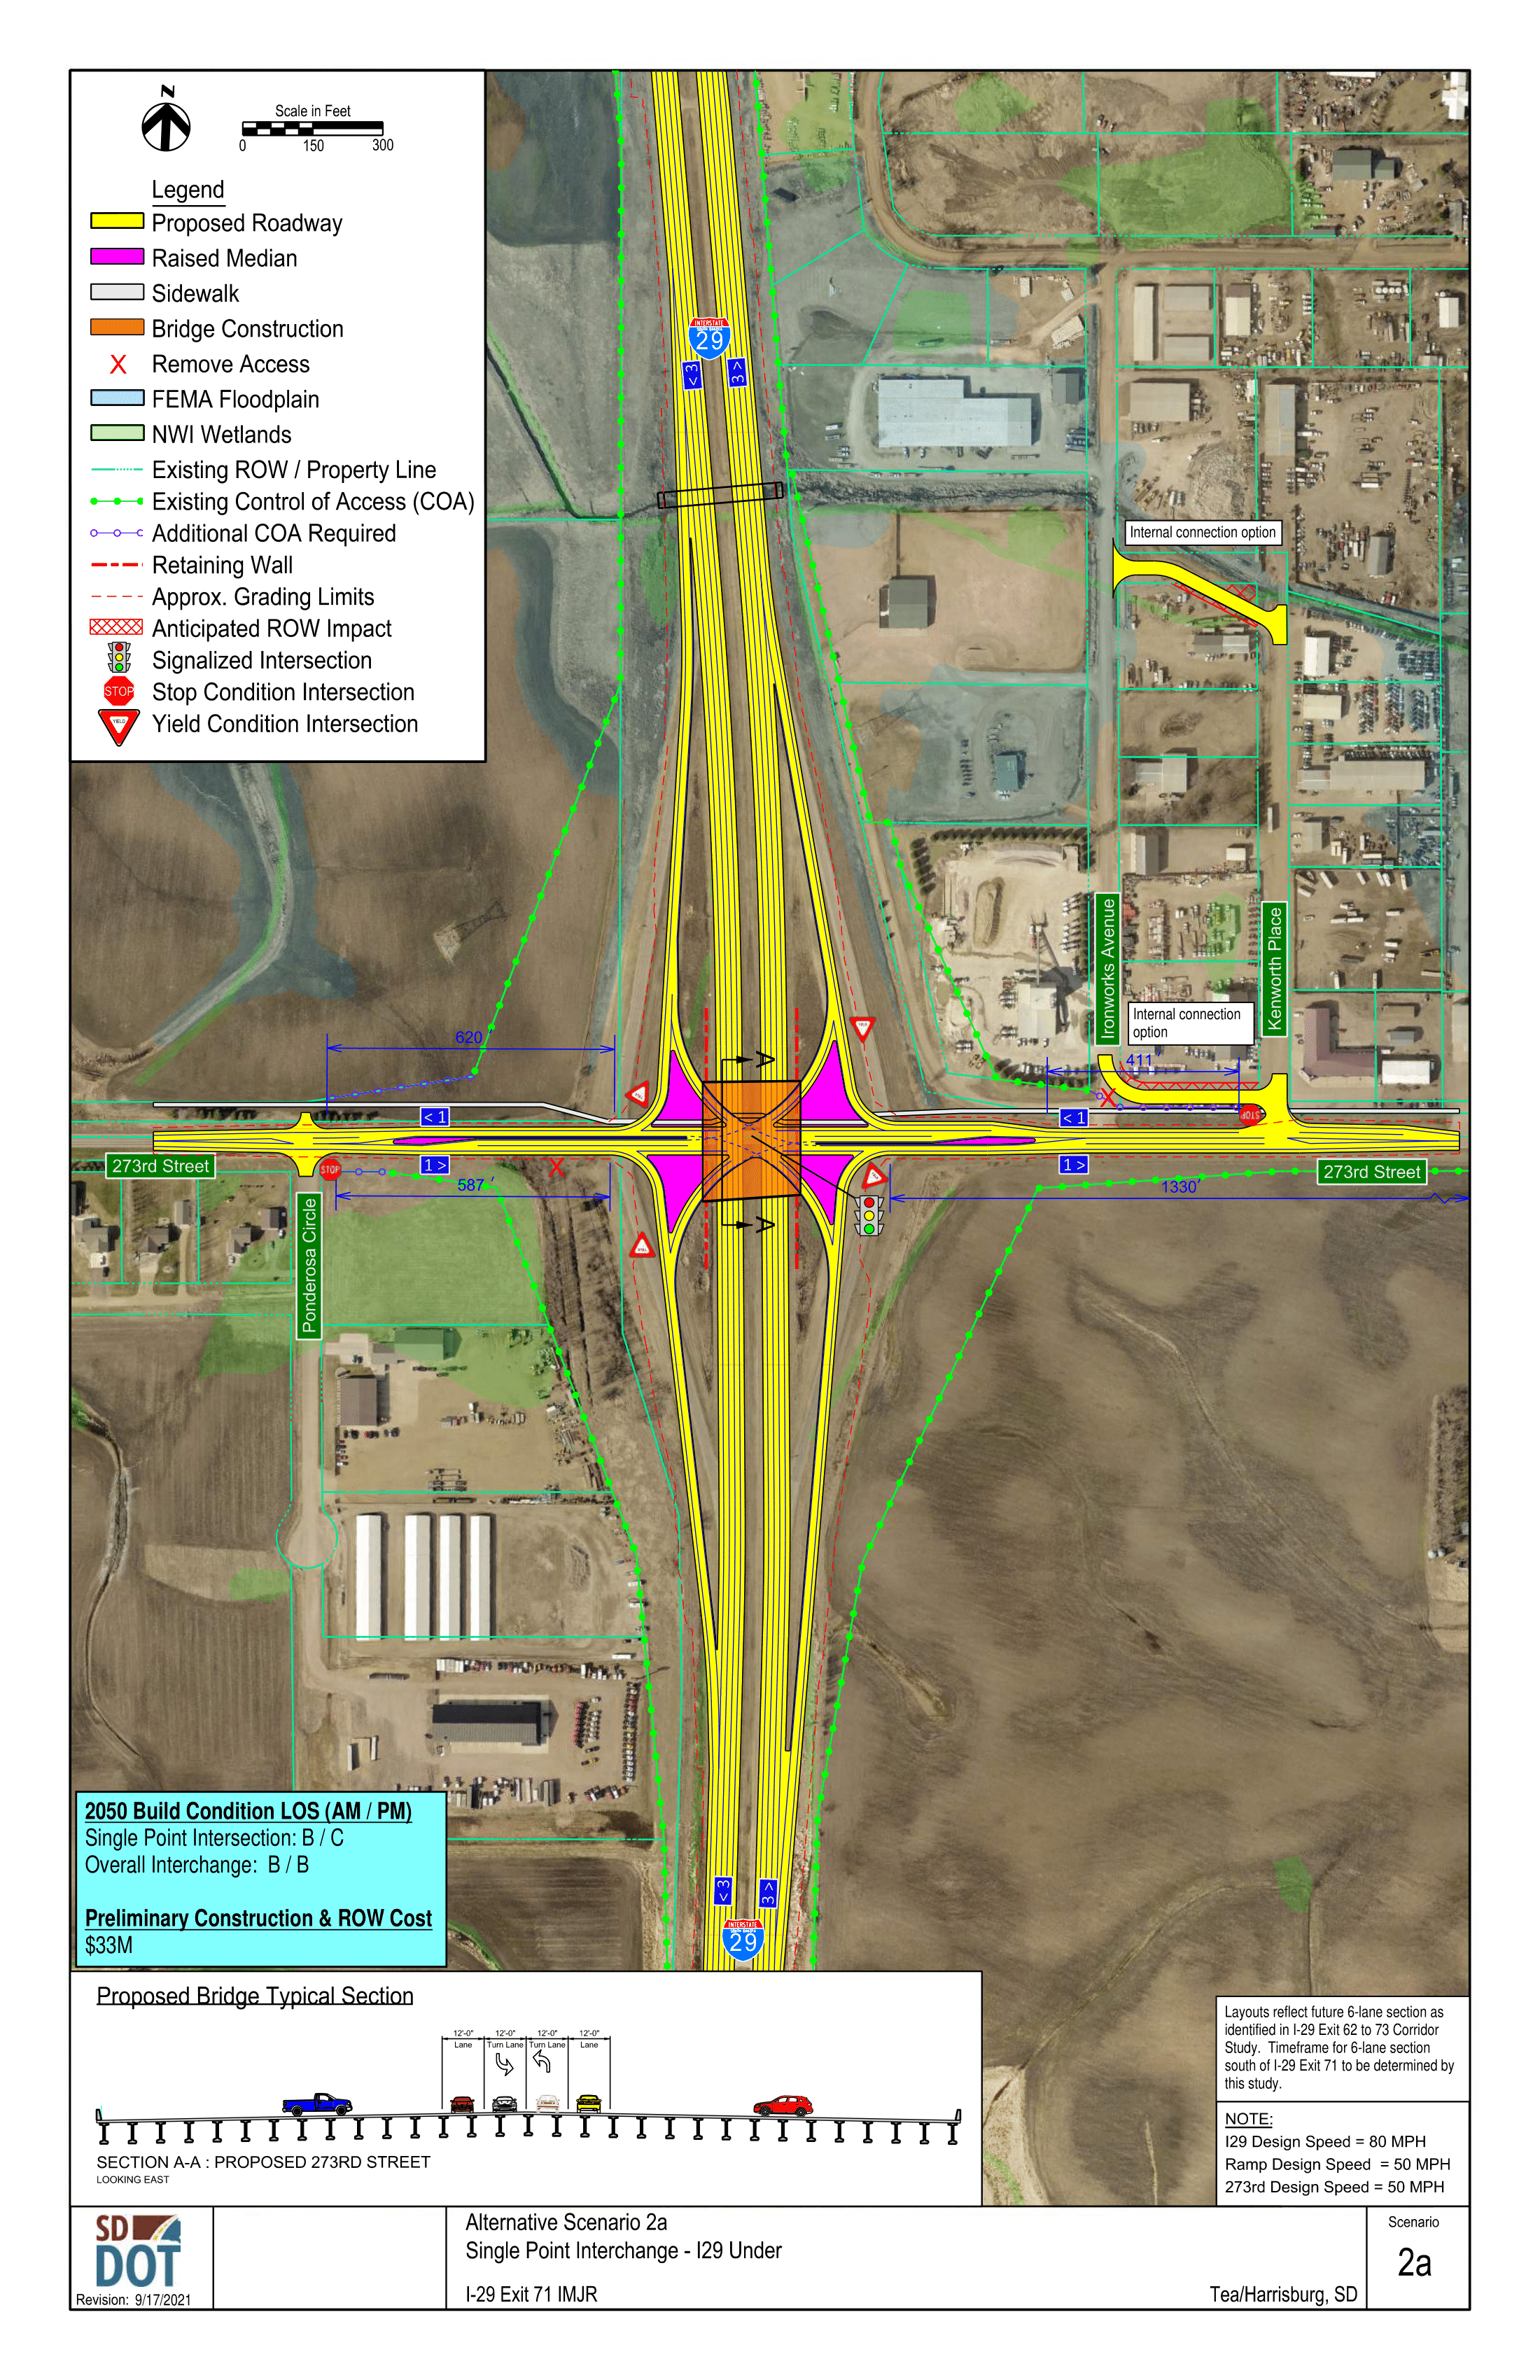 This image shows the conceptual layout of a Single Point Interchange, and what the road under it would look like. Details on the diagram include proposed roadway, raised median, sidewalk, bridge construction, access control, FEMA floodplain, NWI wetlands, existing Right of Ways and property lines, existing control of access points, additional control of access points needed, retaining walls, grading limits, anticipated right of way impacts, signalized intersections, stop condition intersections and yield condition intersections.